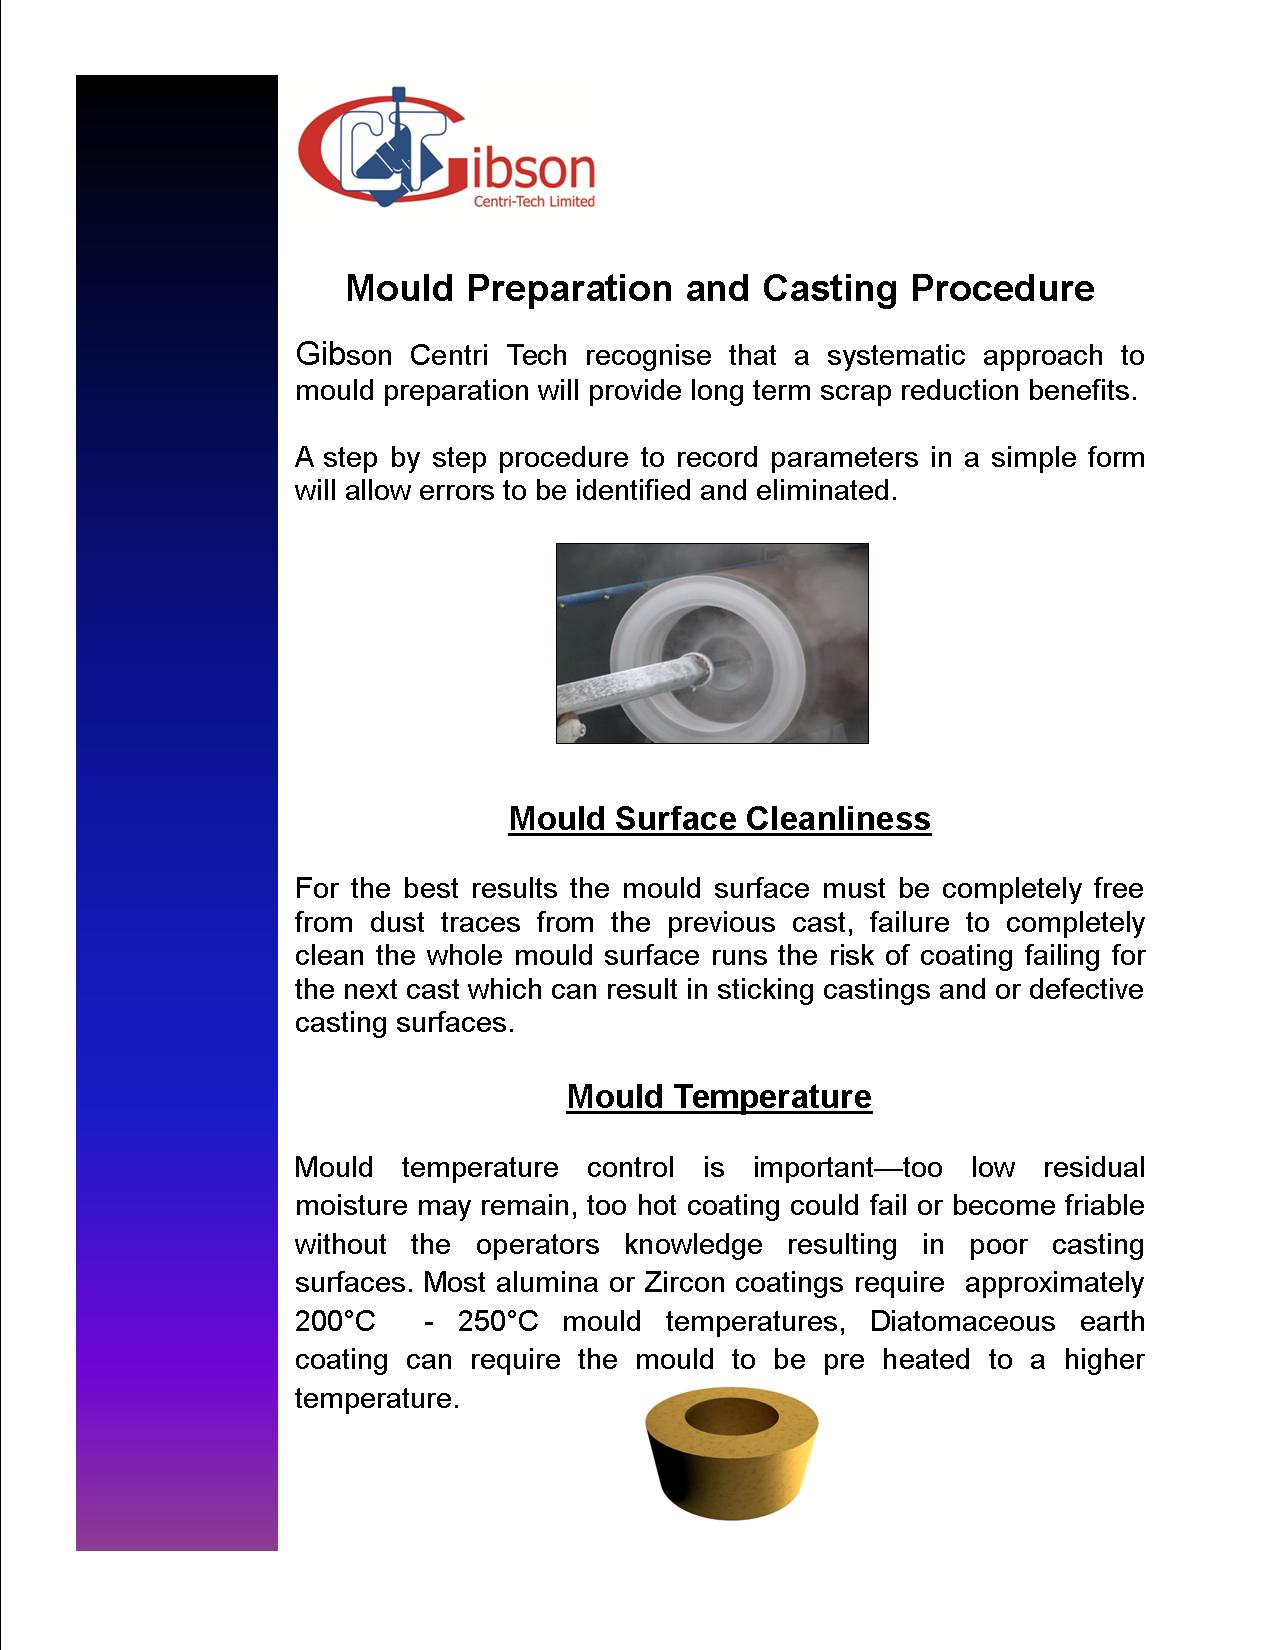 Mould Preperation and Casting procedure